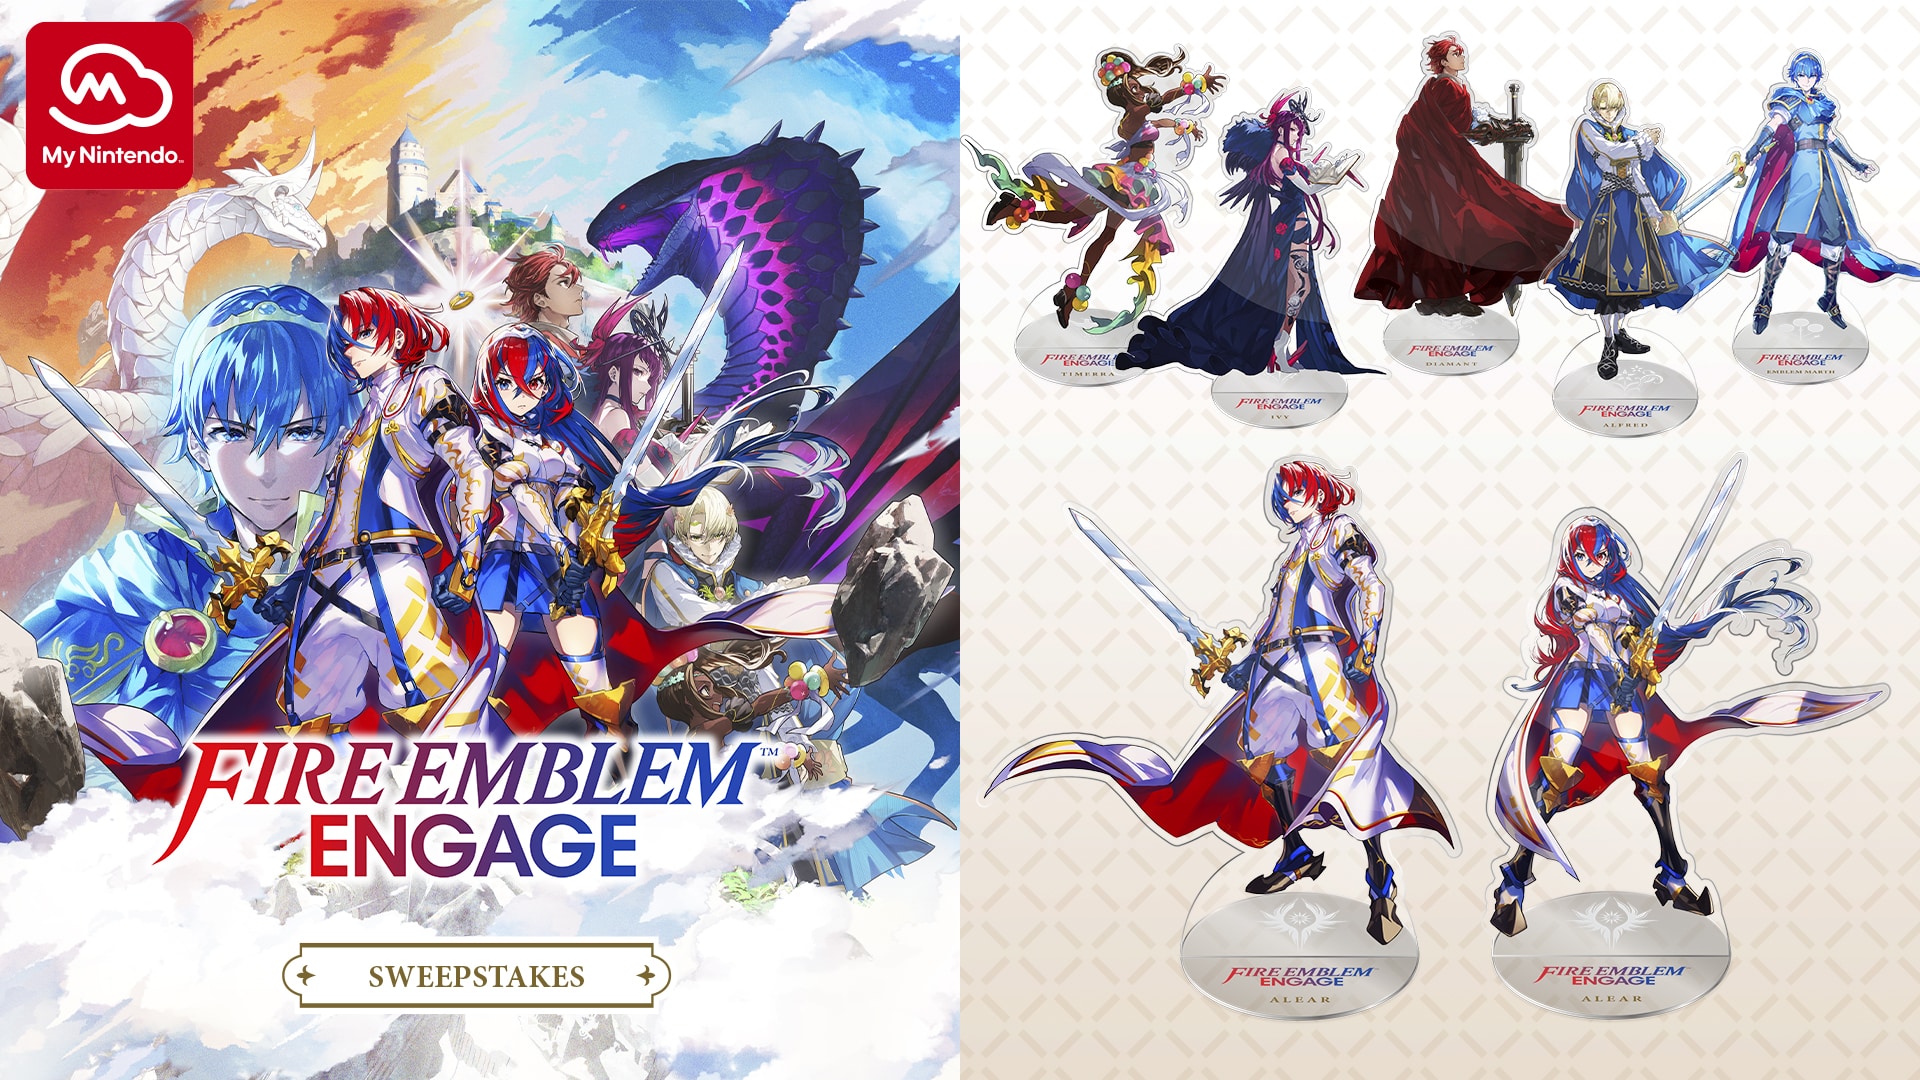 Nintendo of America Launches Fire Emblem Engage Sweepstakes for 7 Character Acrylic Stands